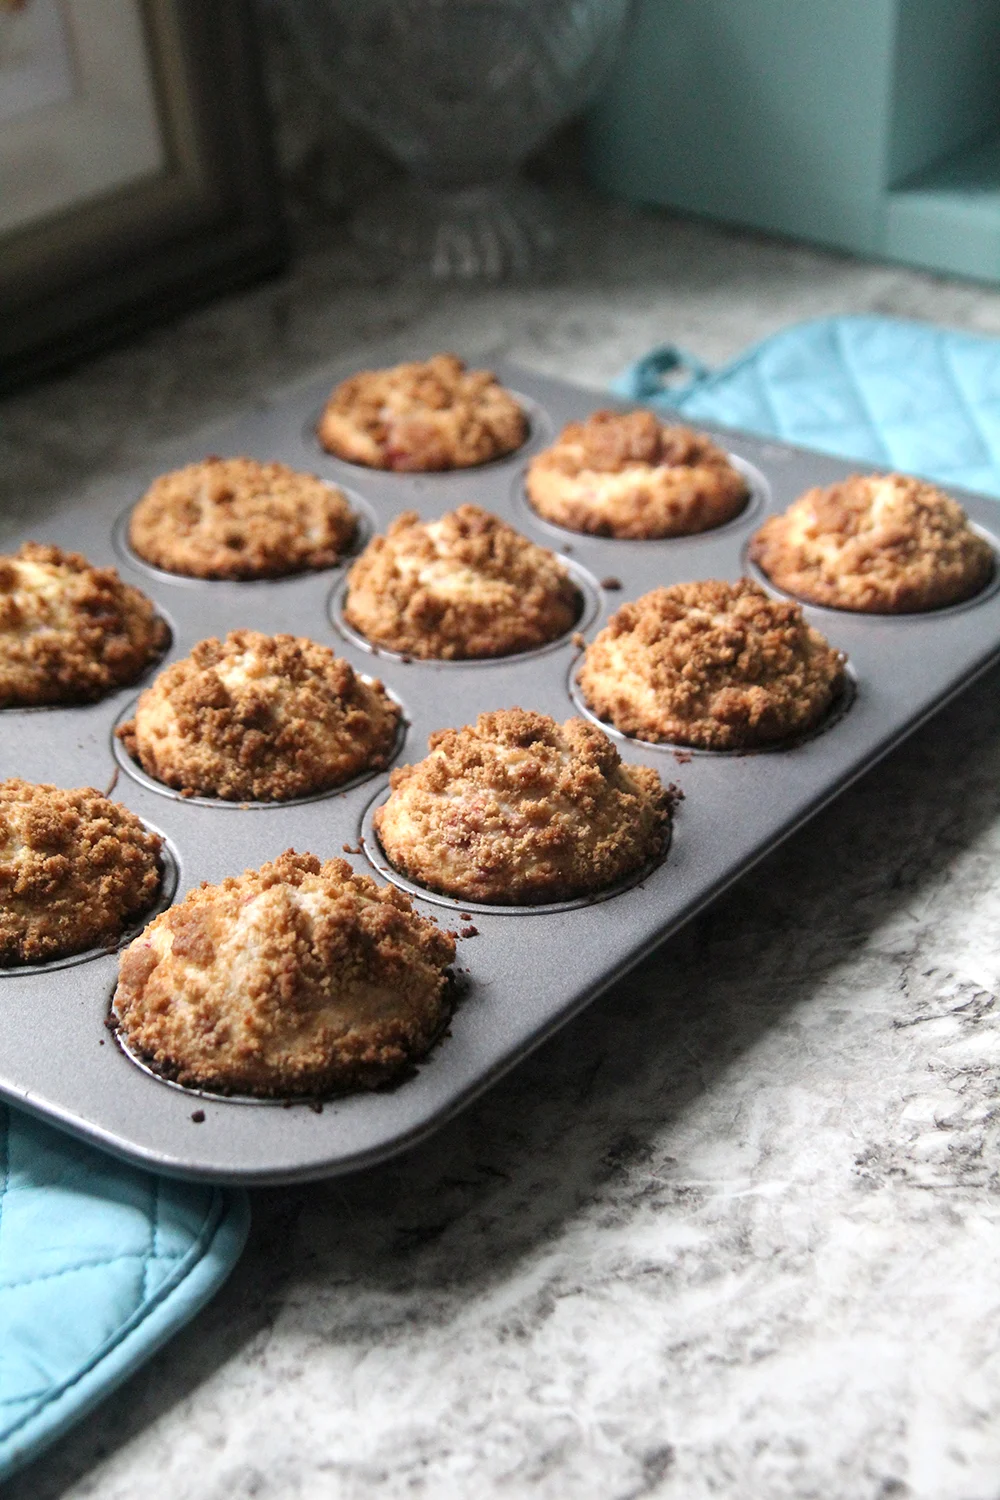 A muffin pan filled with Raspberry Streusel Muffins sits on a countertop.